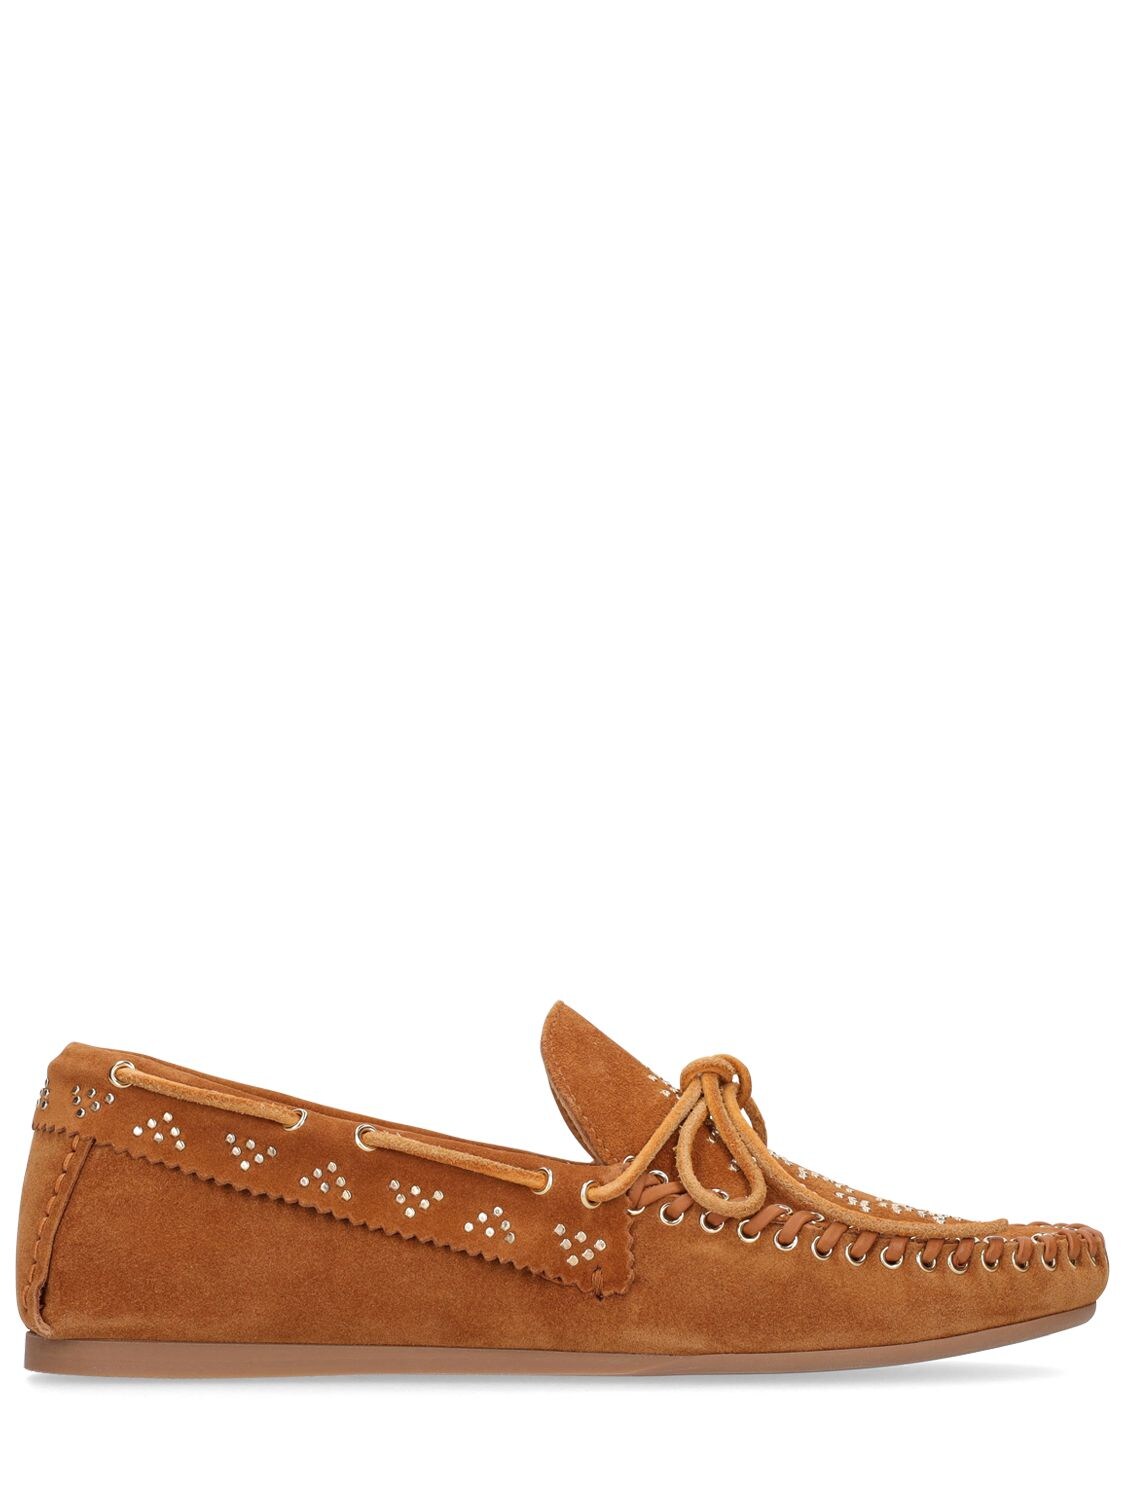 ISABEL MARANT 10mm Freen Studded Suede Loafers